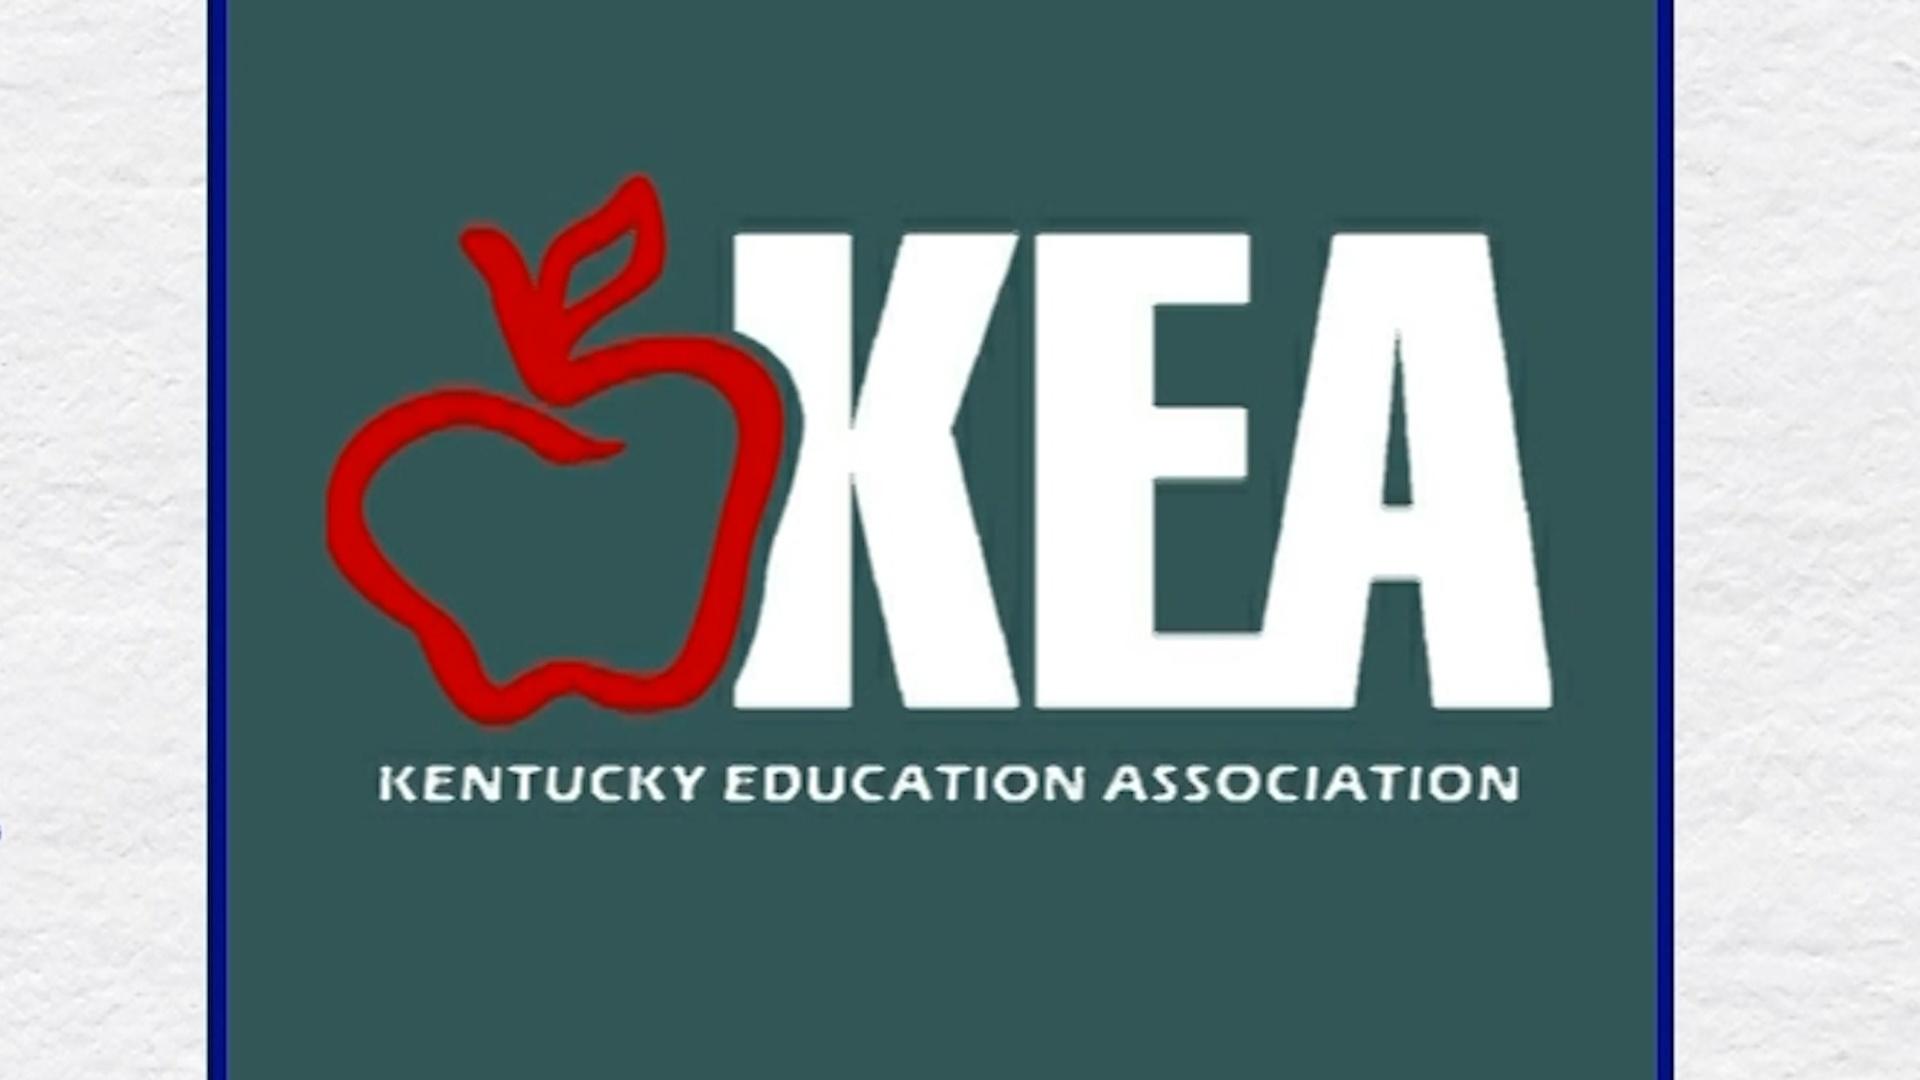 Kentucky Education Association Reacts to Exclusion of School Employee Raises in Budget